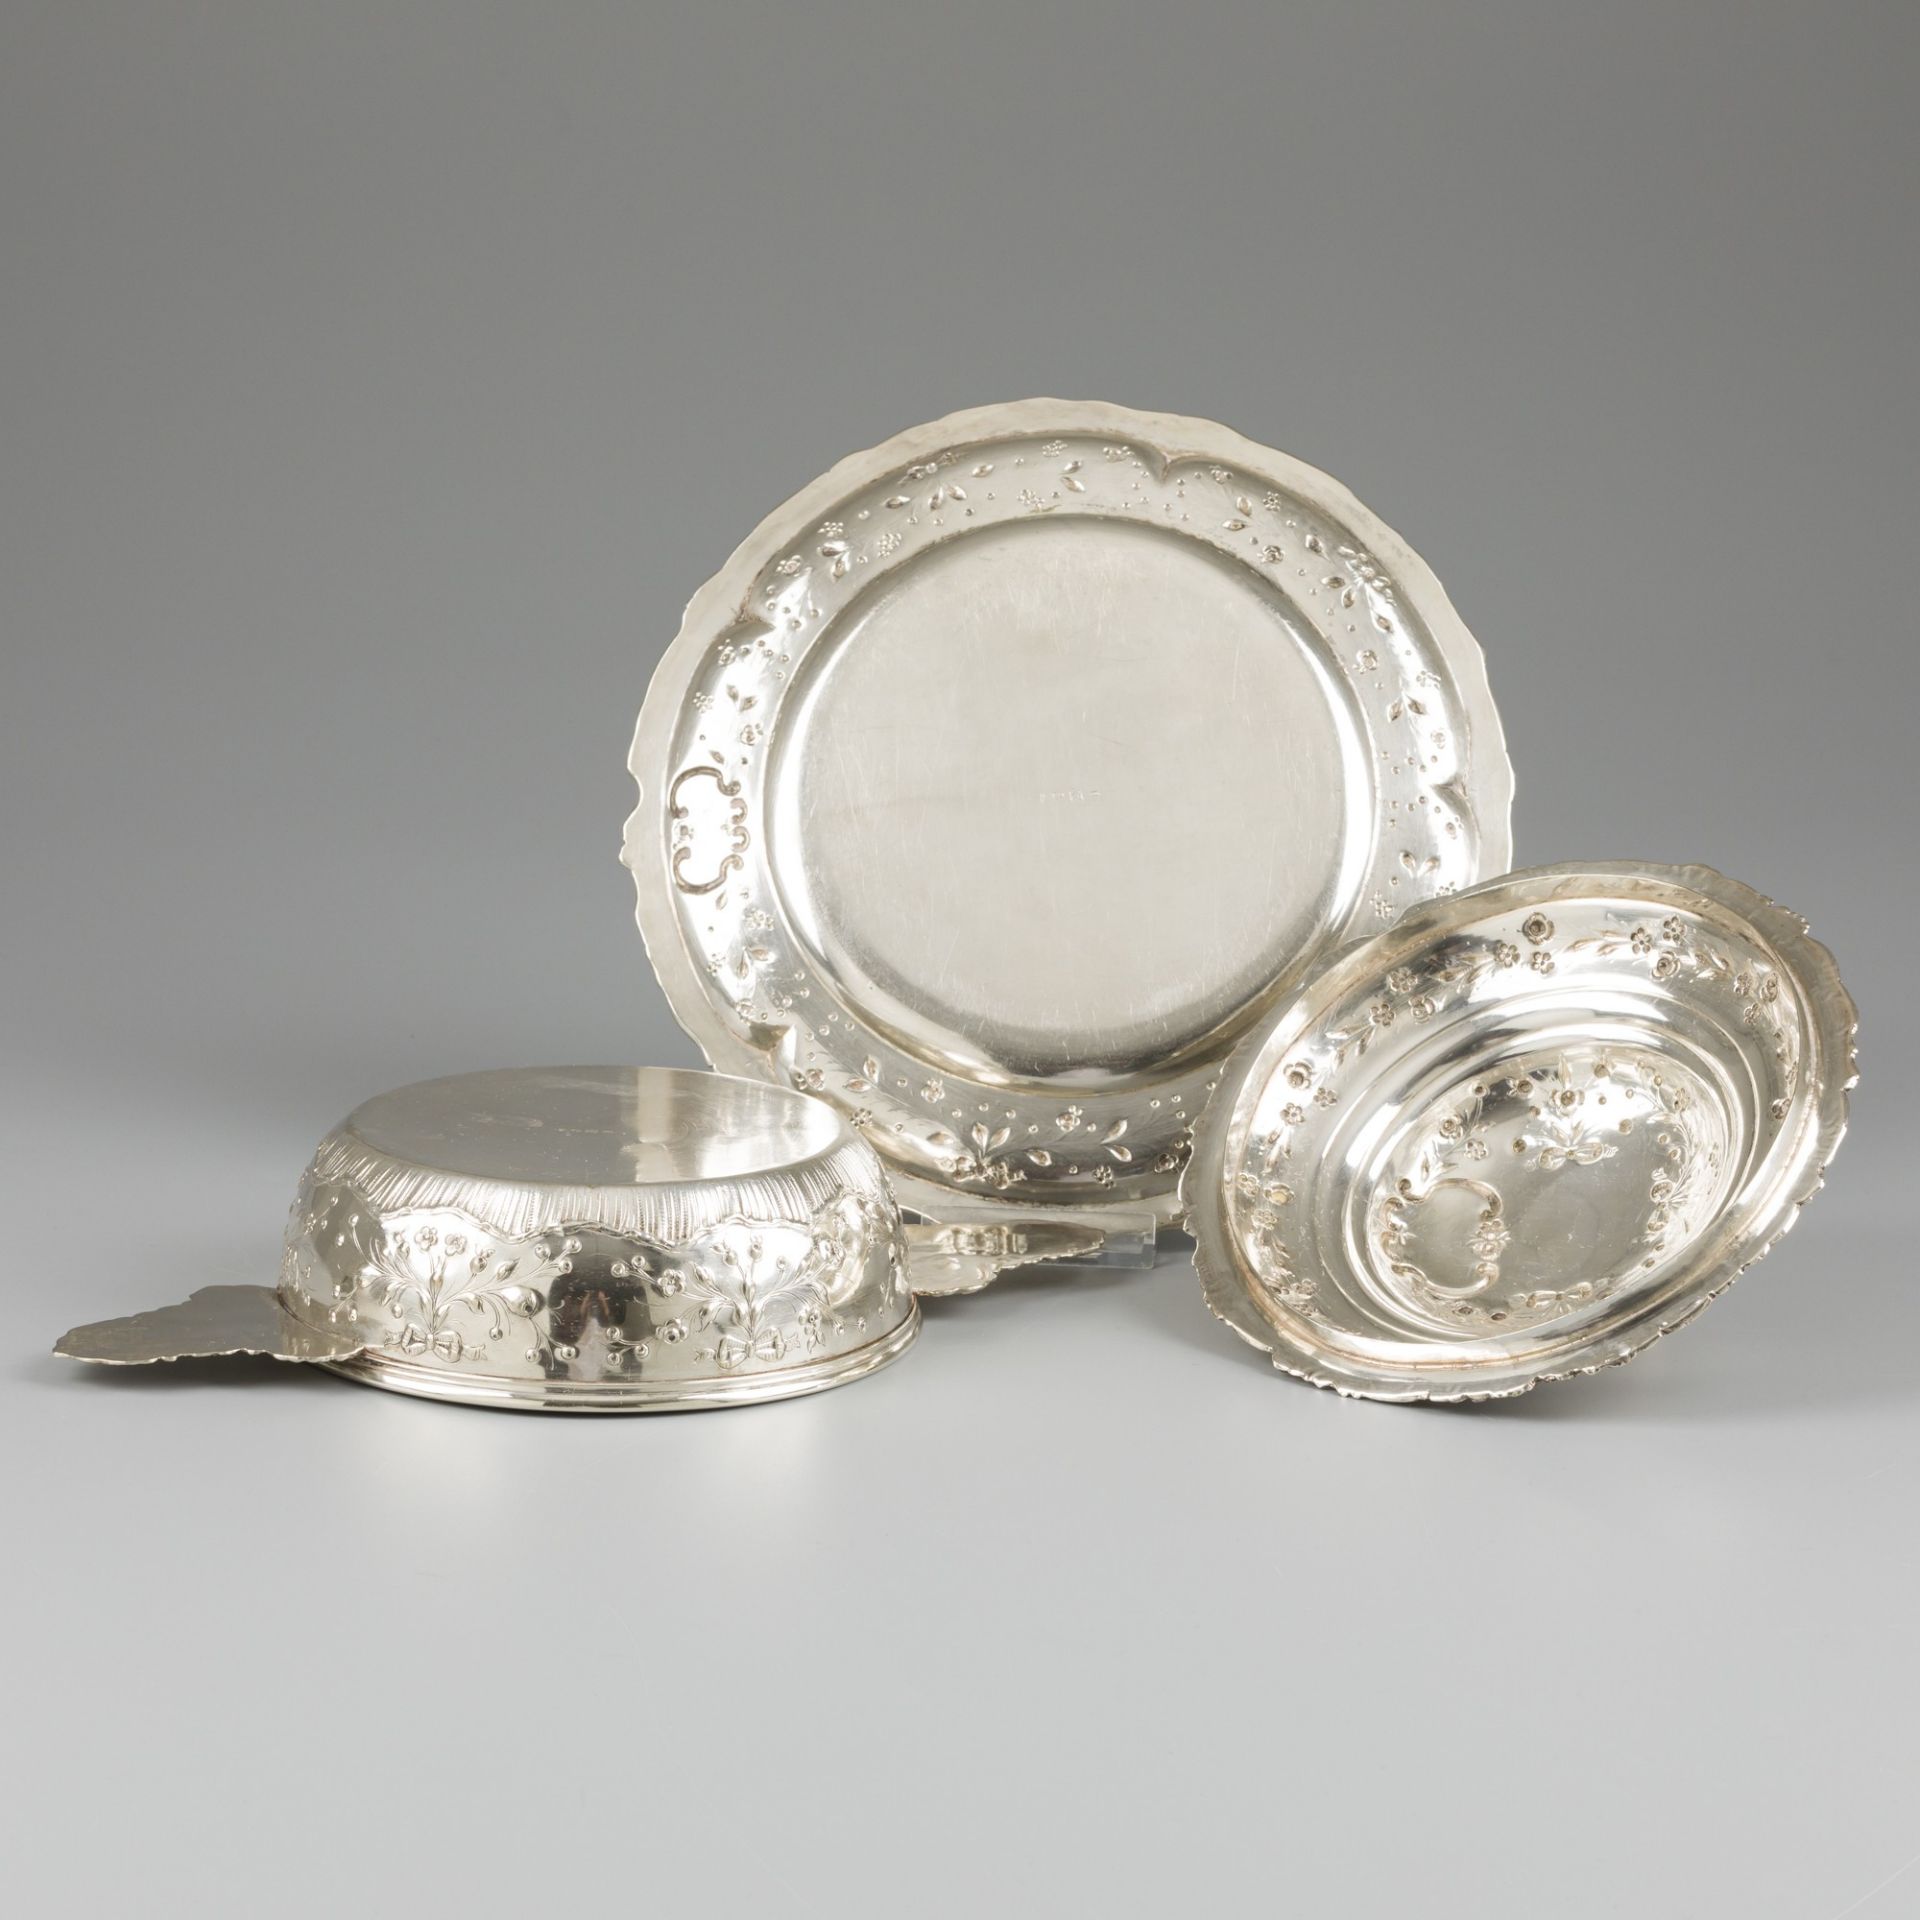 Covered dish with saucer, silver. - Image 5 of 6